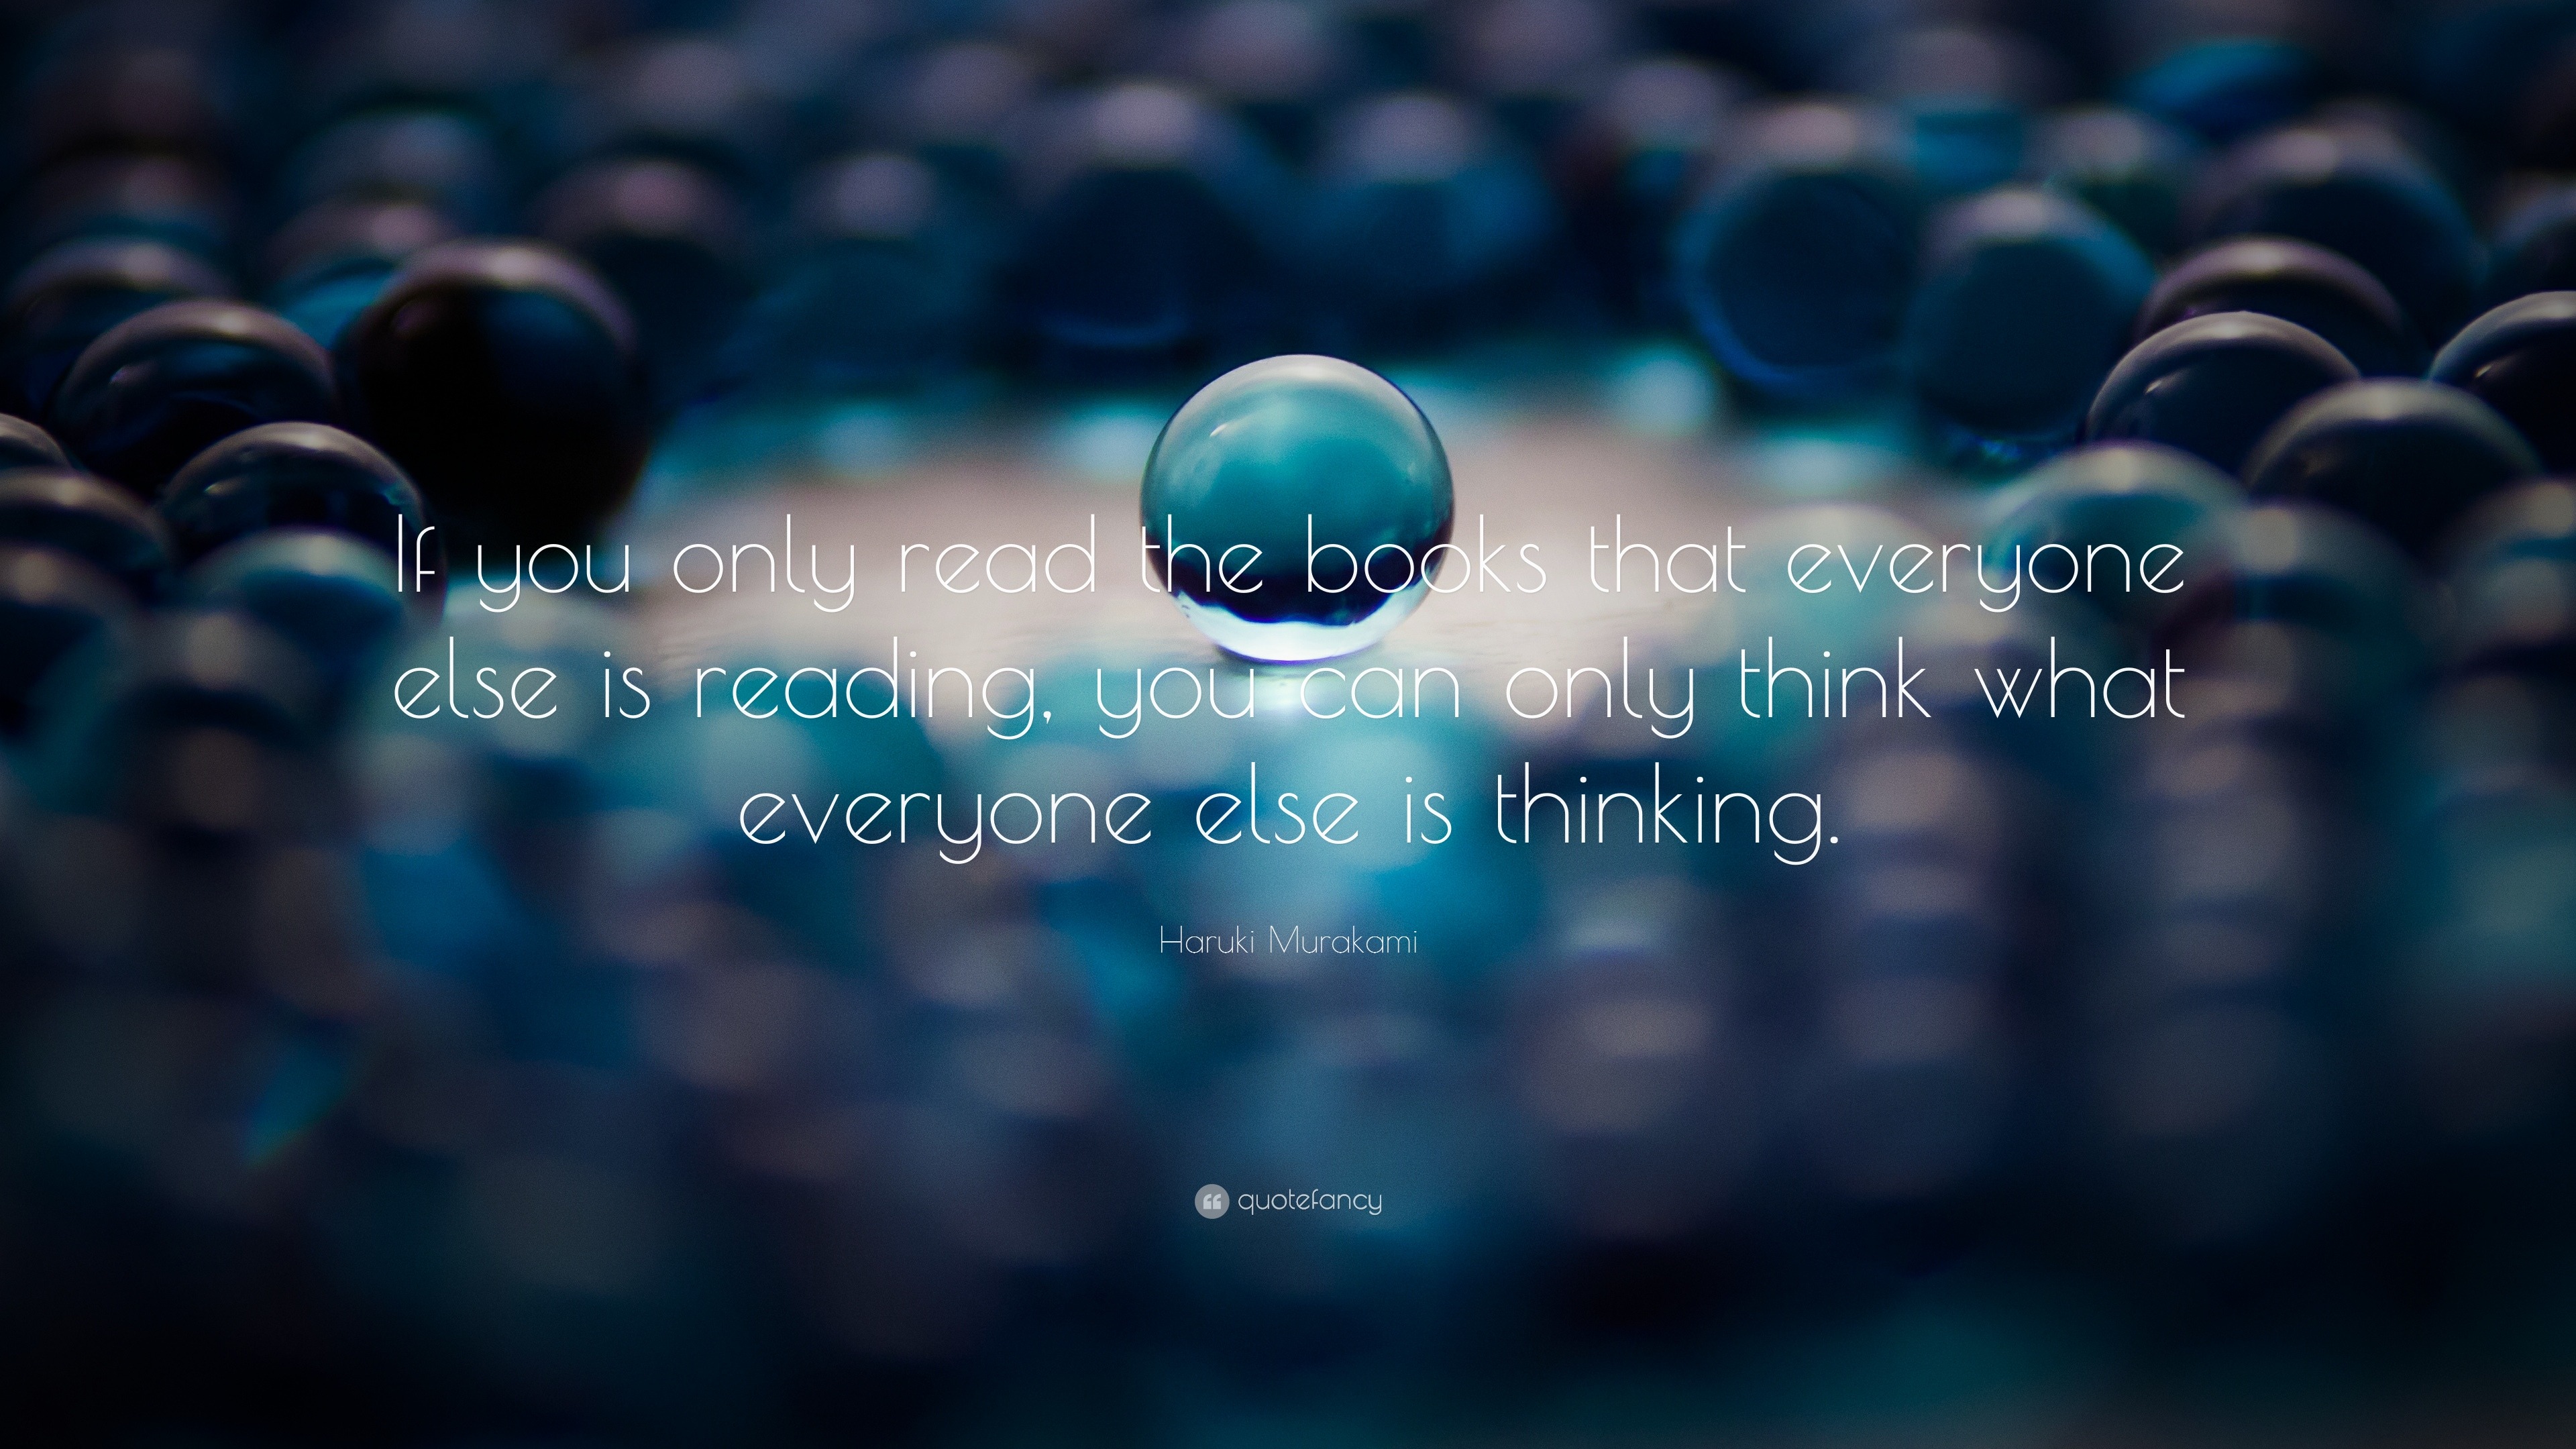 Haruki Murakami Quote “if You Only Read The Books That Everyone Else Is Reading You Can Only